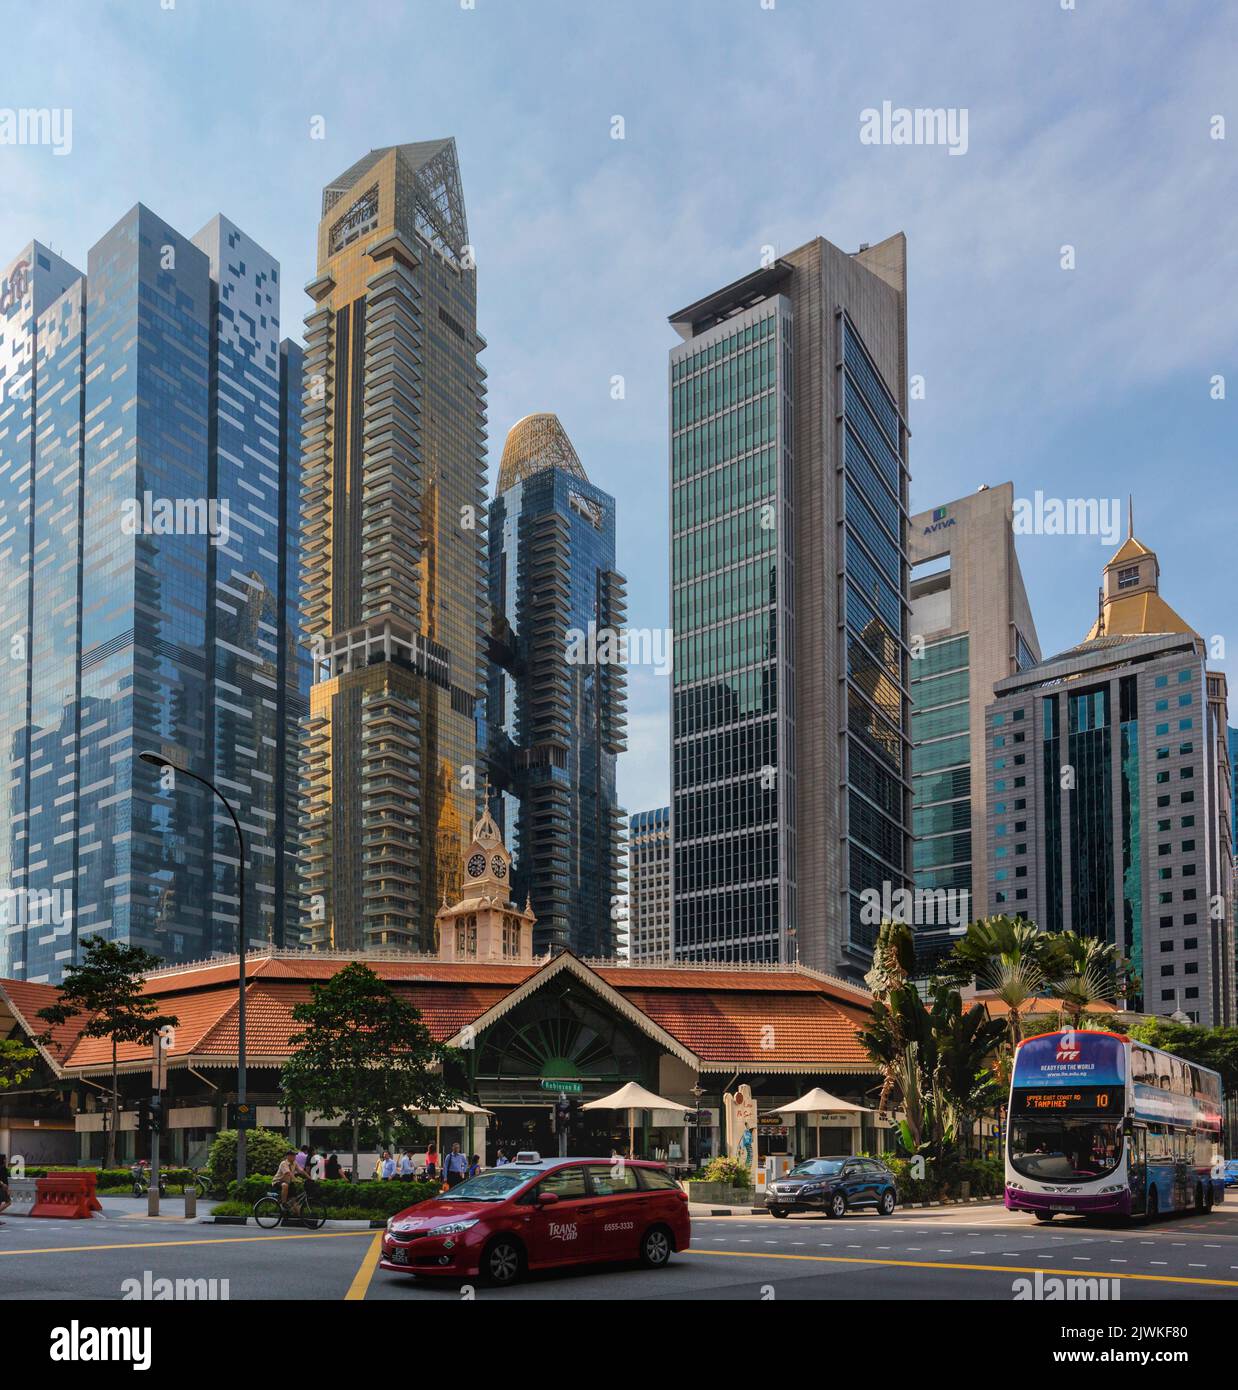 The 19th century Lau Pa Sat, also known as Telok Ayer Market beneath towering modern buildings in Robinson Road, Republic of Singapore.  The present i Stock Photo